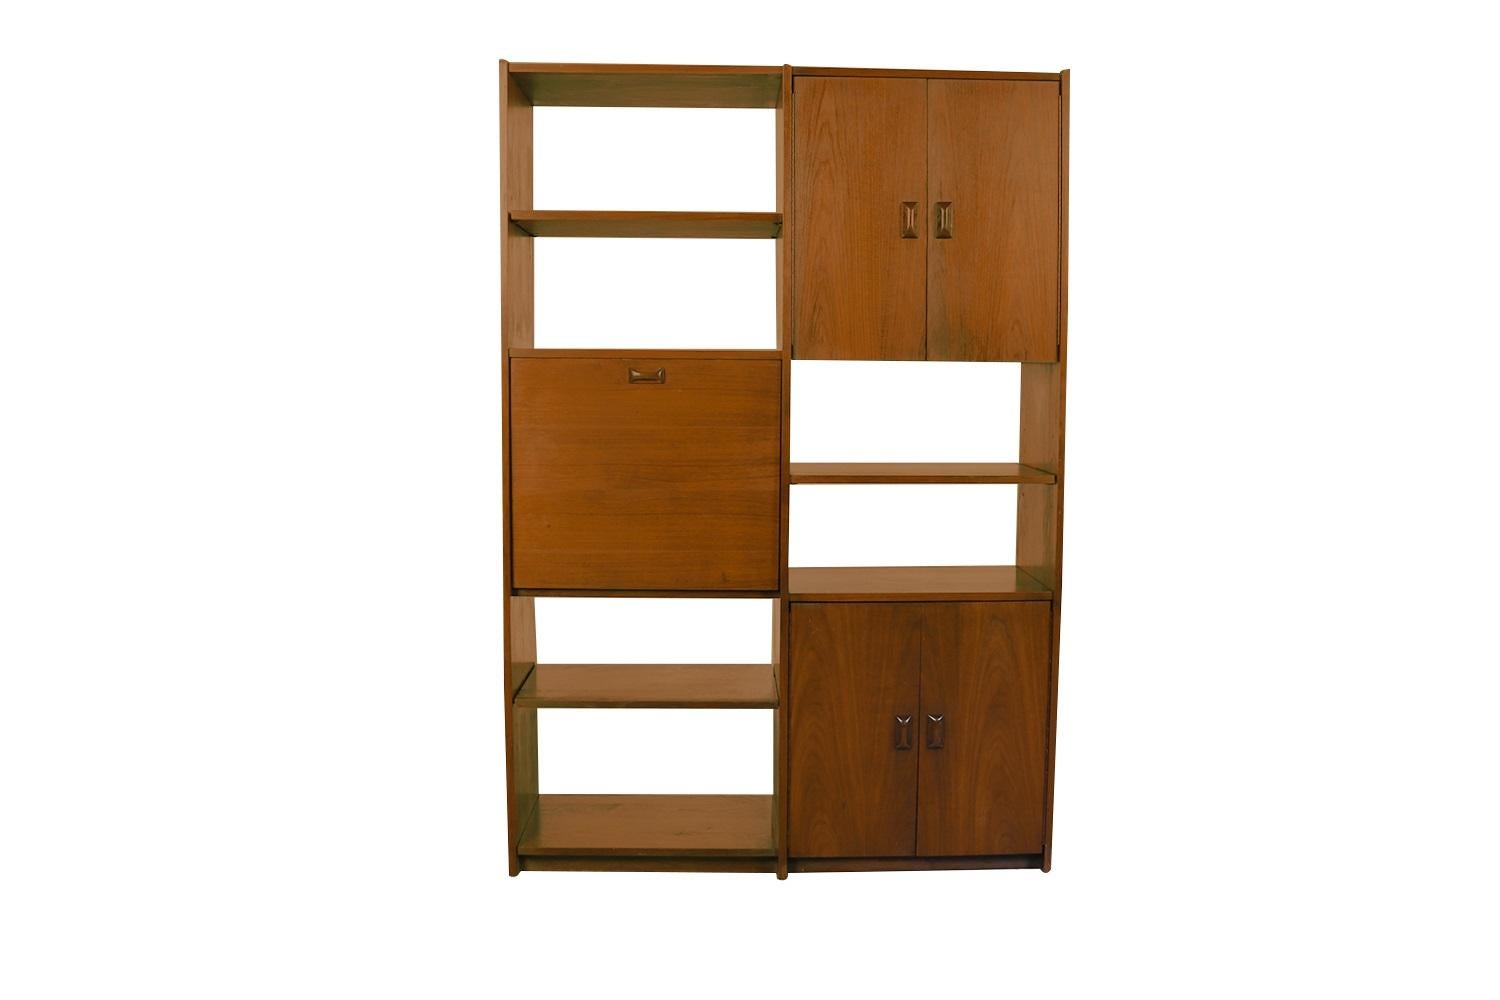 A remarkable two unit Mid-Century Modern, freestanding, room divider wall unit with a bar/desk, and cabinets, in nearly pristine condition. Built as a one-piece unit features gorgeous dark walnut tones and grain, with a fully finished back. The